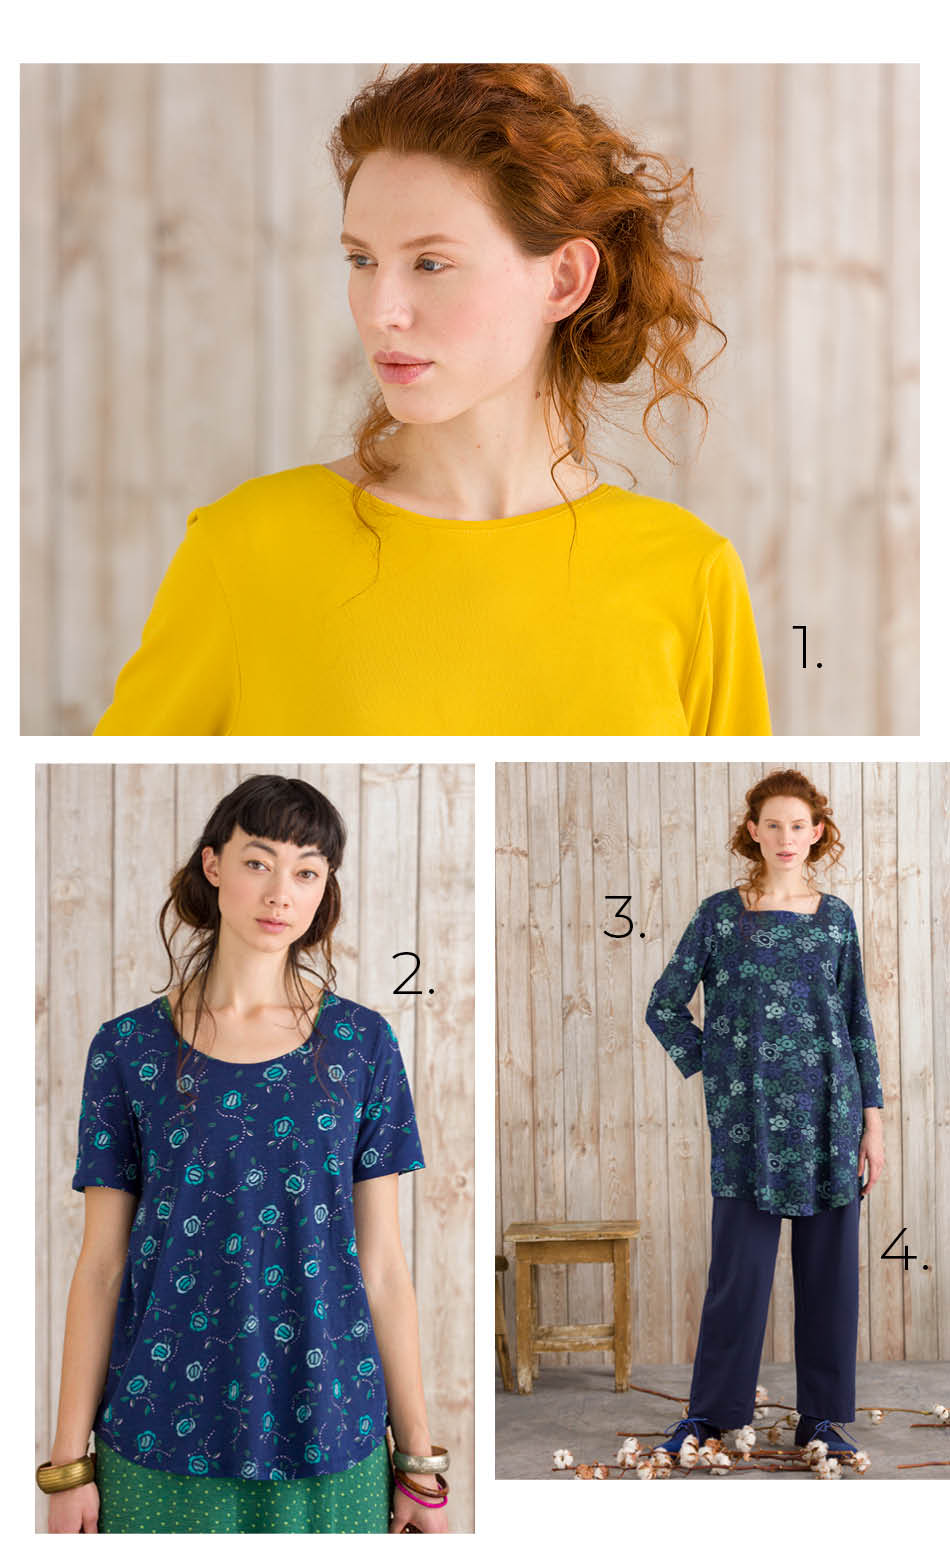 Richly-hued and cheerful in organic cotton and modal/elastane